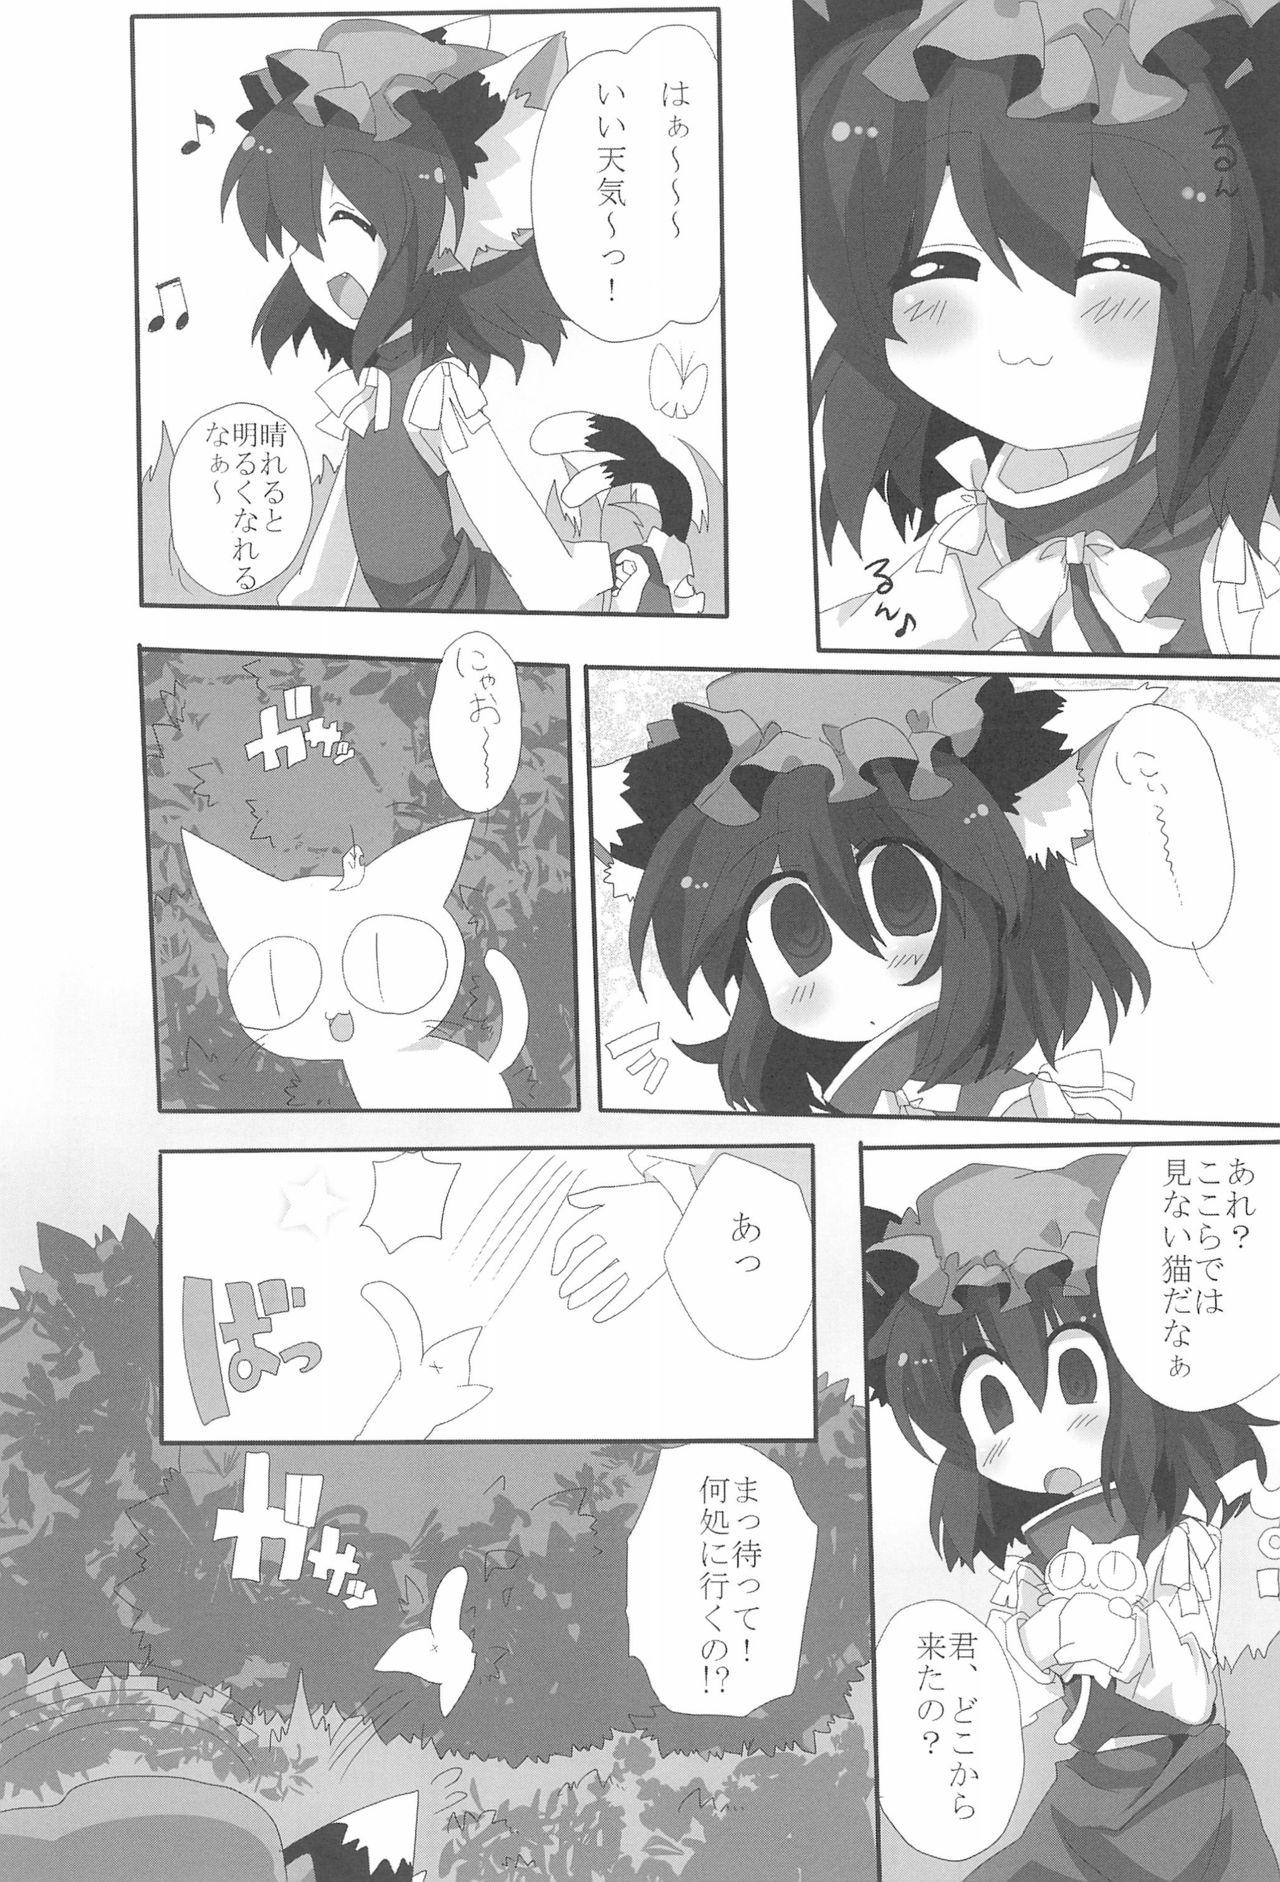 Camgirls NYAS! ATTRACTION - Touhou project Ebony - Page 5